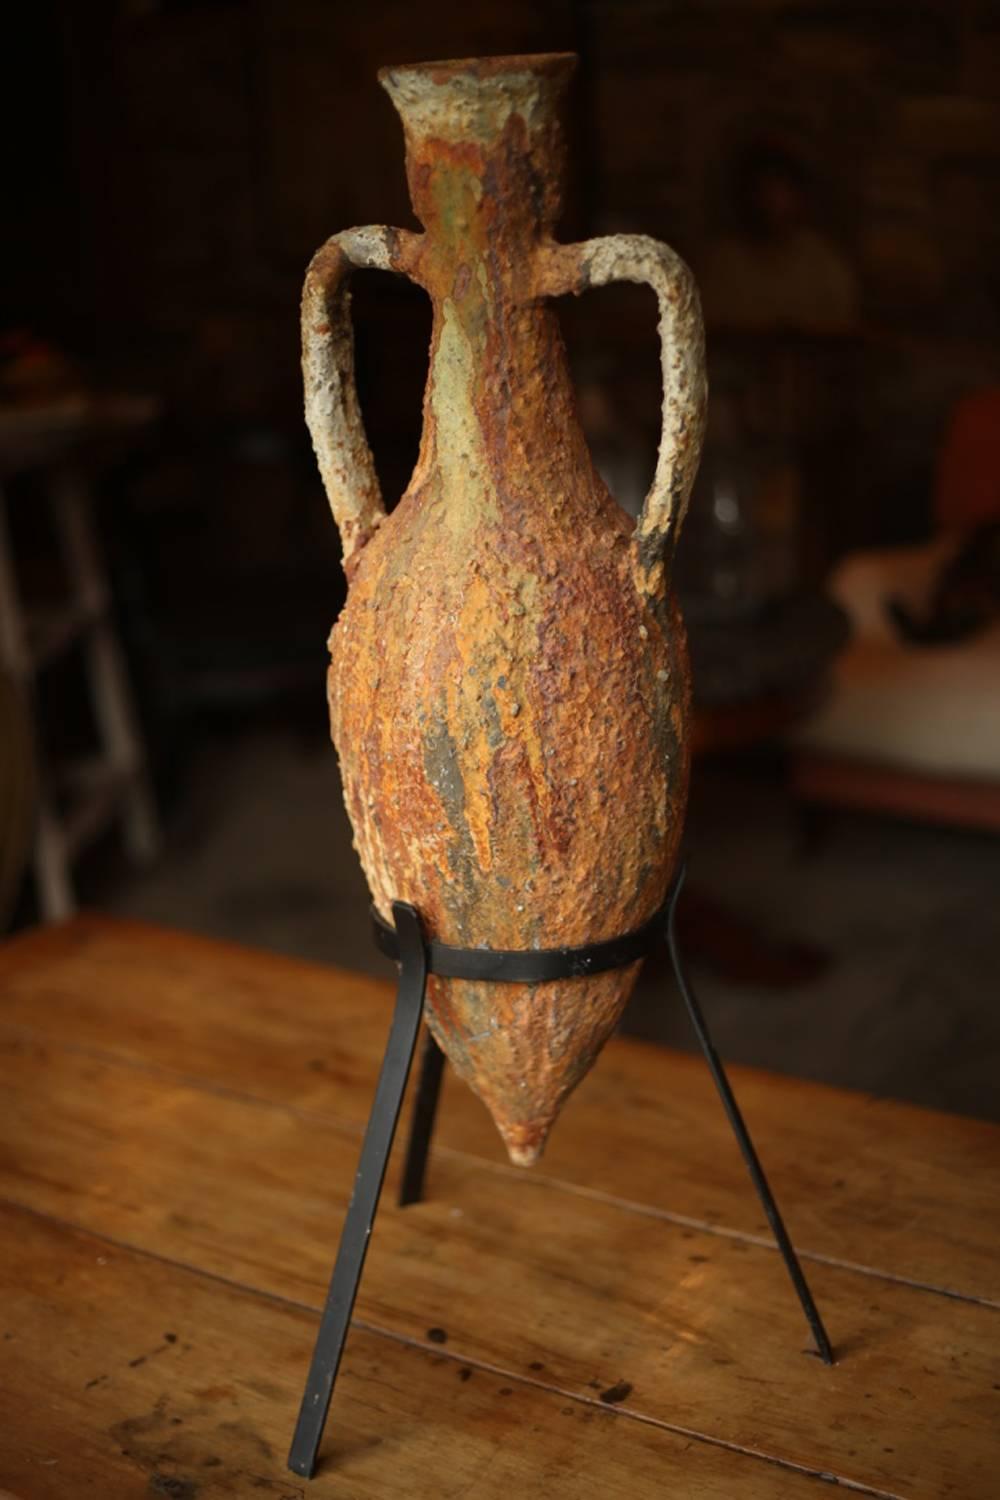 This is an absolutely fantastic large ancient Greek wine amphora. It was found on the sea bed hundreds of years after the ship it was on sunk. Originally it would have been used to carry wine. After the ship sank the piece was in the sea for years